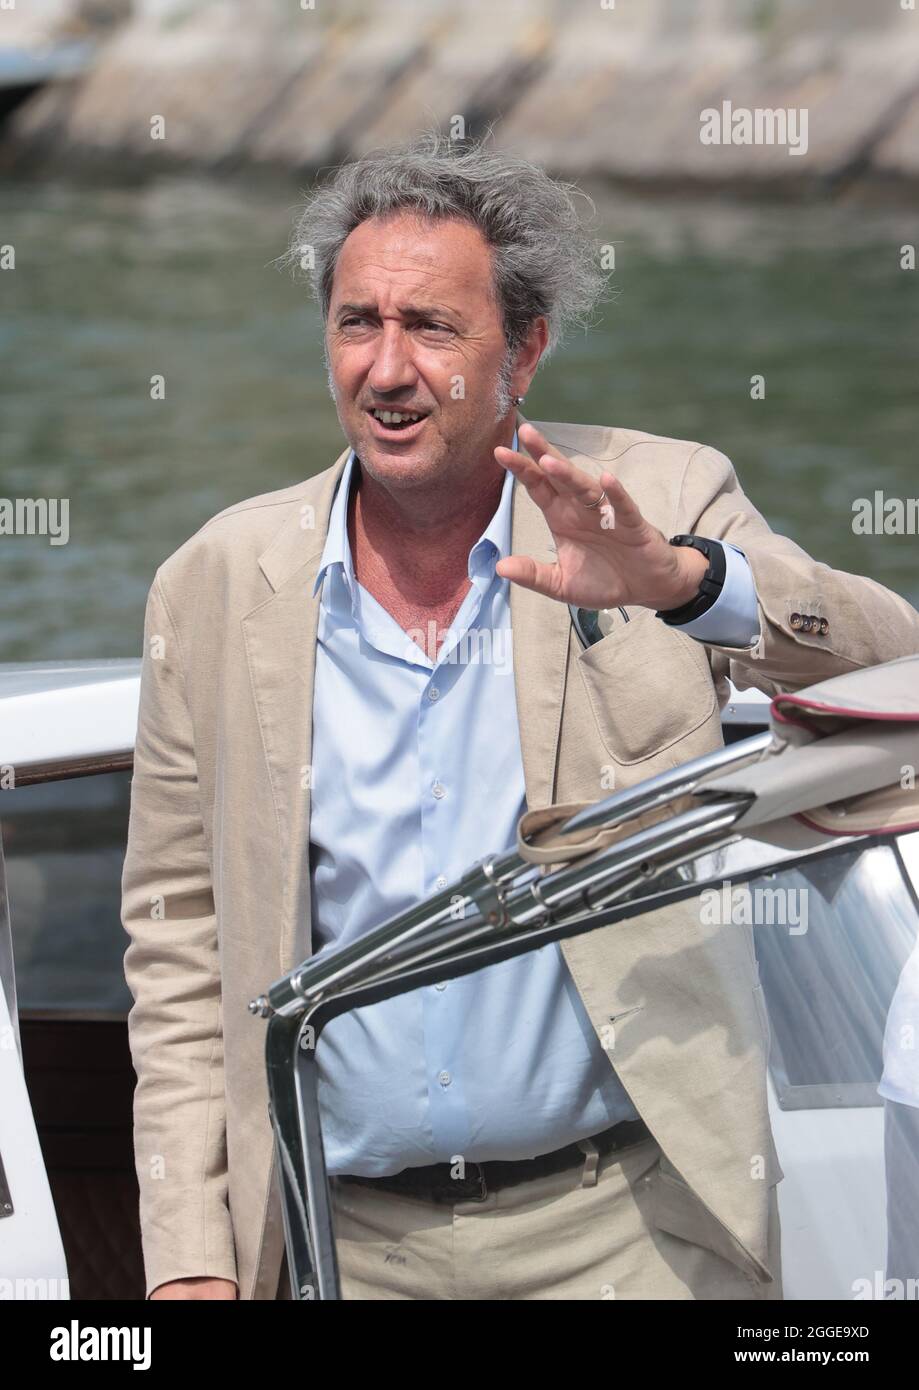 VENICE, ITALY - AUGUST 31: Director Paolo Sorrentino is seen arriving at the 78th Venice Film Festival at the Excelsior darsena on August 31, 2021 in Venice, Italy Stock Photo